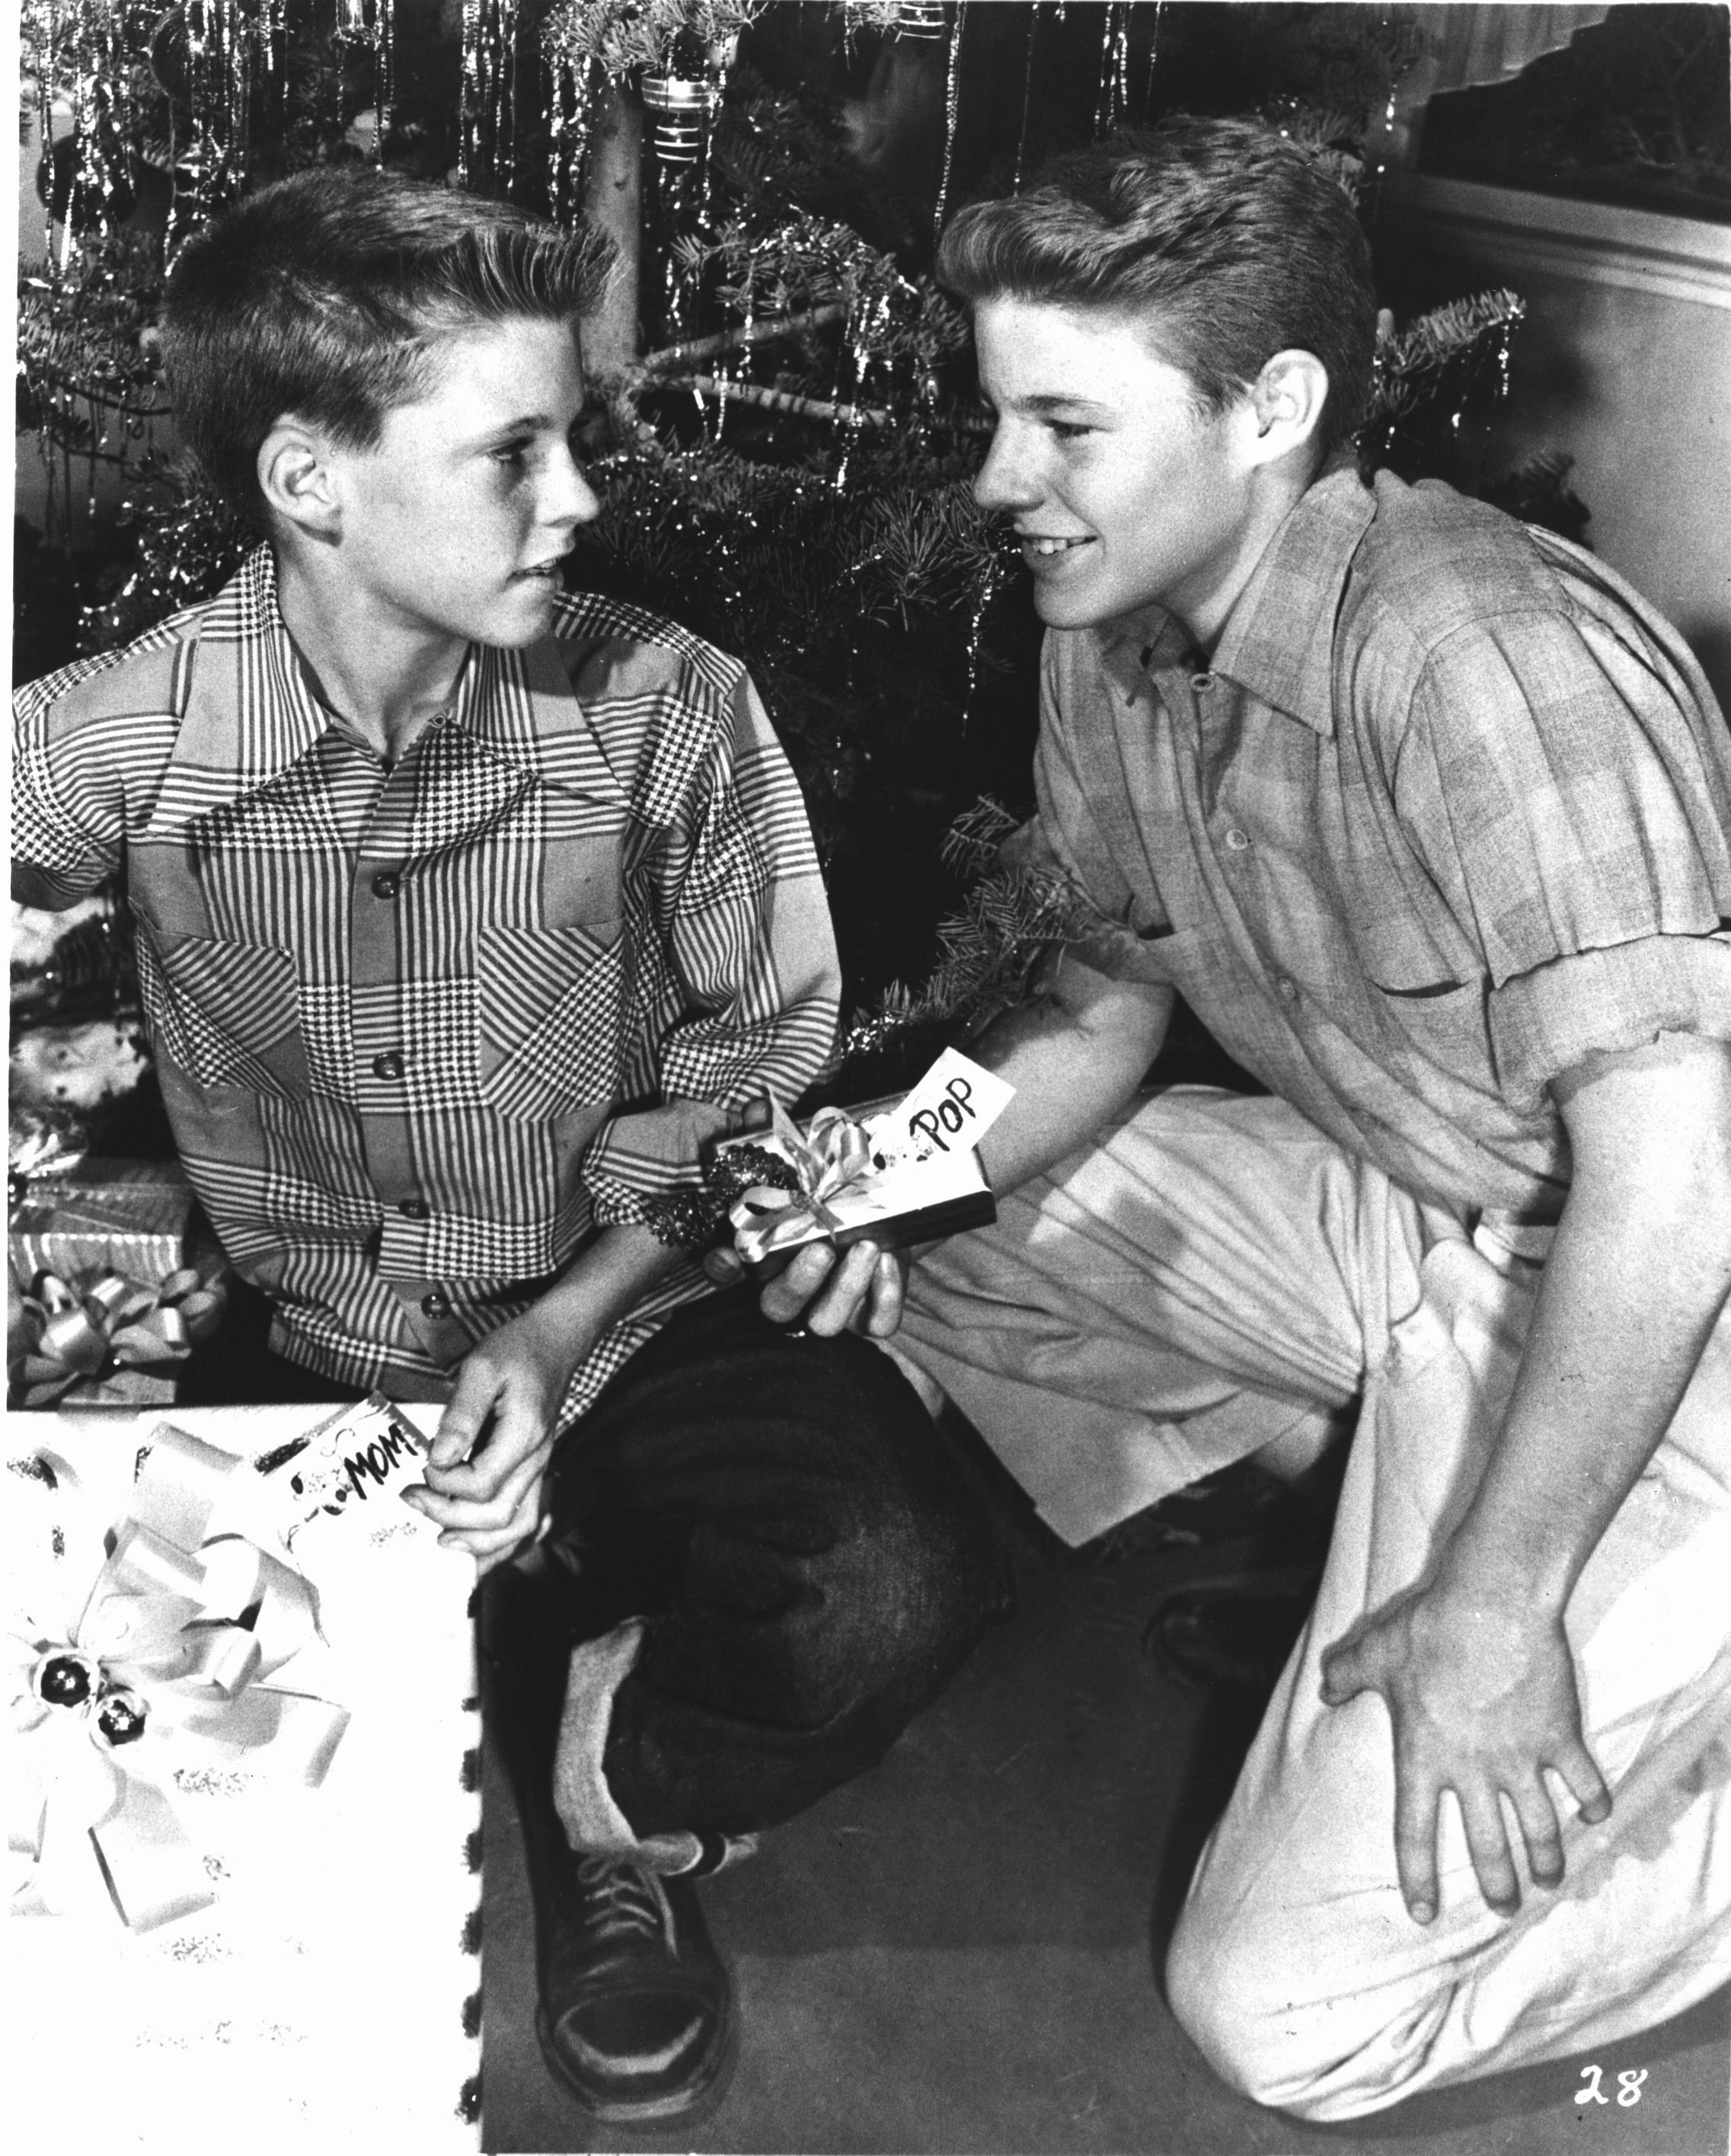 Ricky and David Nelson on “The Adventures of Ozzie and Harriet,” on January 9, 1953 | Source: Getty Images